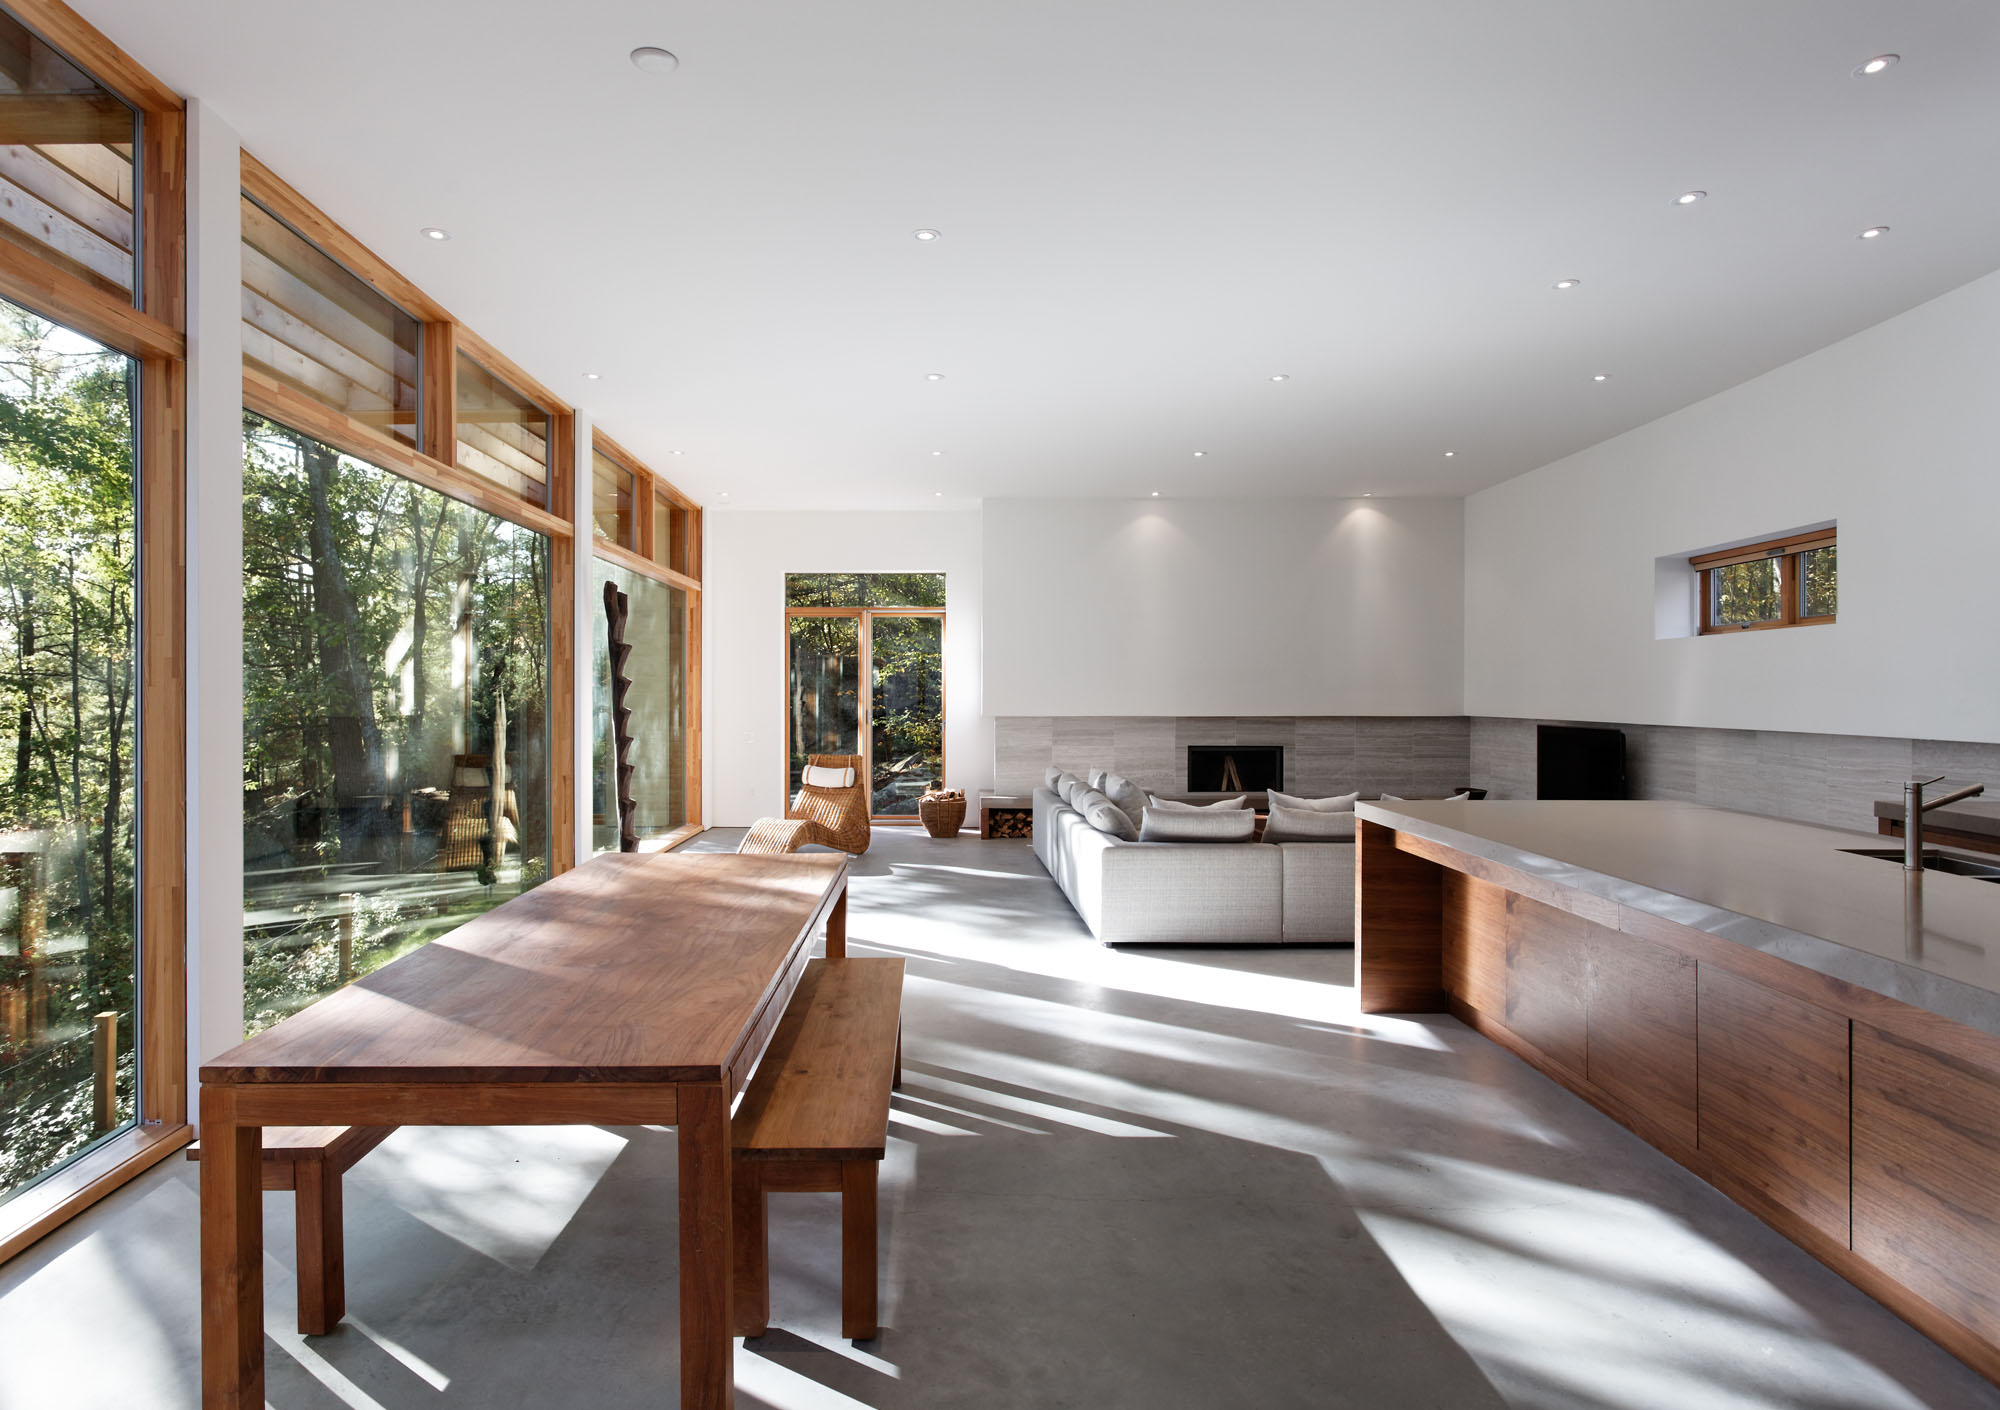 Cute Architecture Minimalist Wooden Residence Interior By Tact And ...